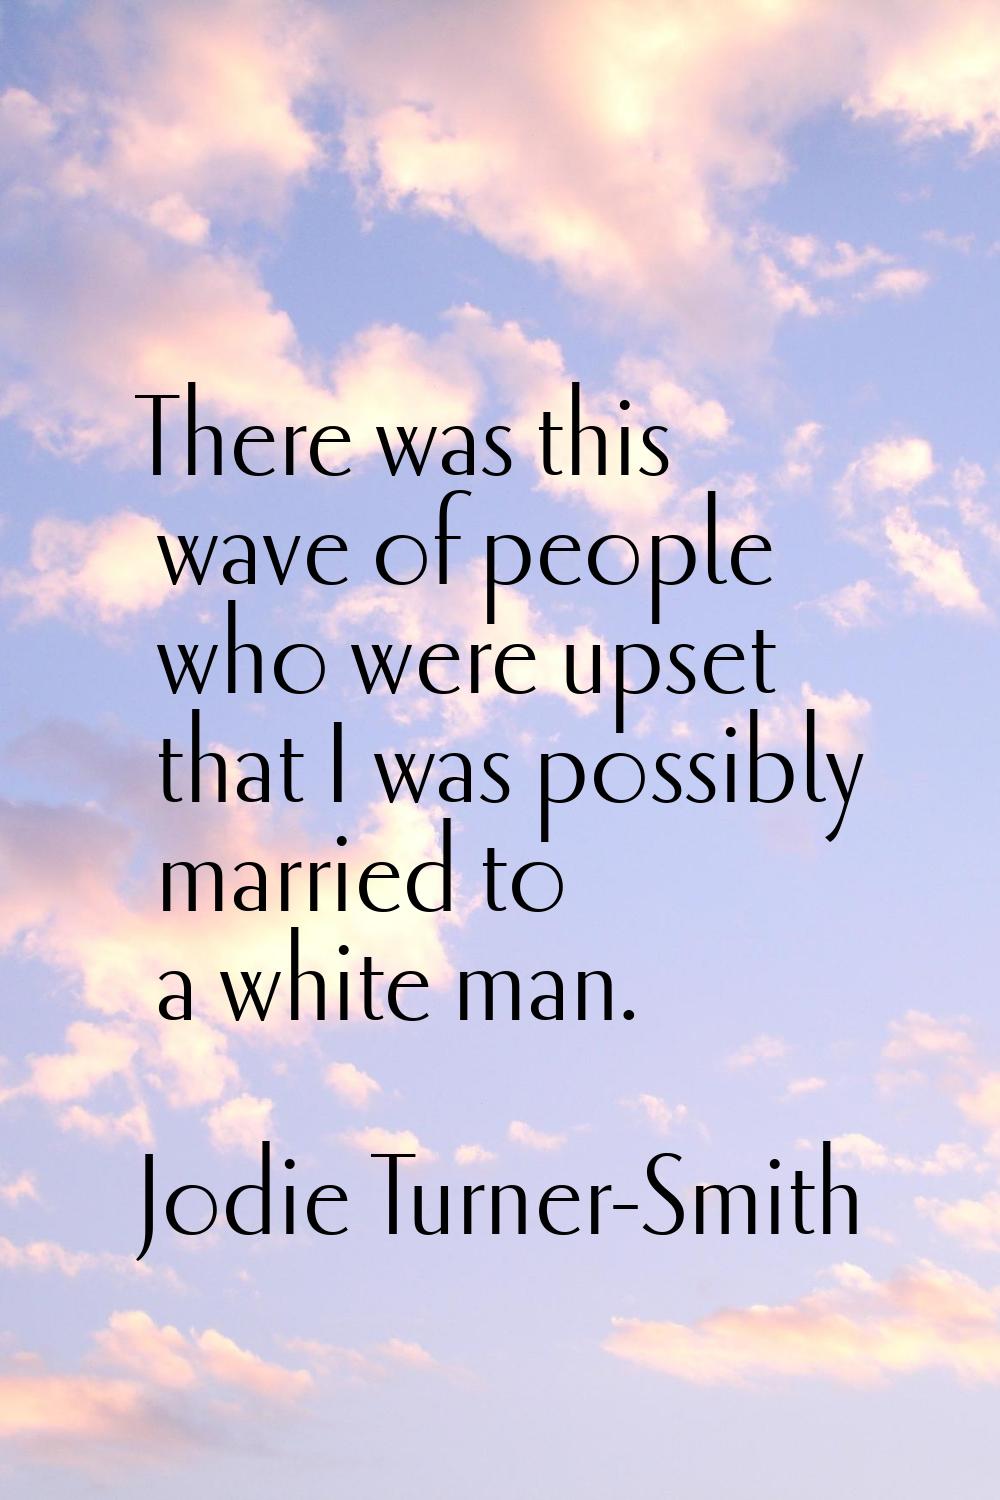 There was this wave of people who were upset that I was possibly married to a white man.